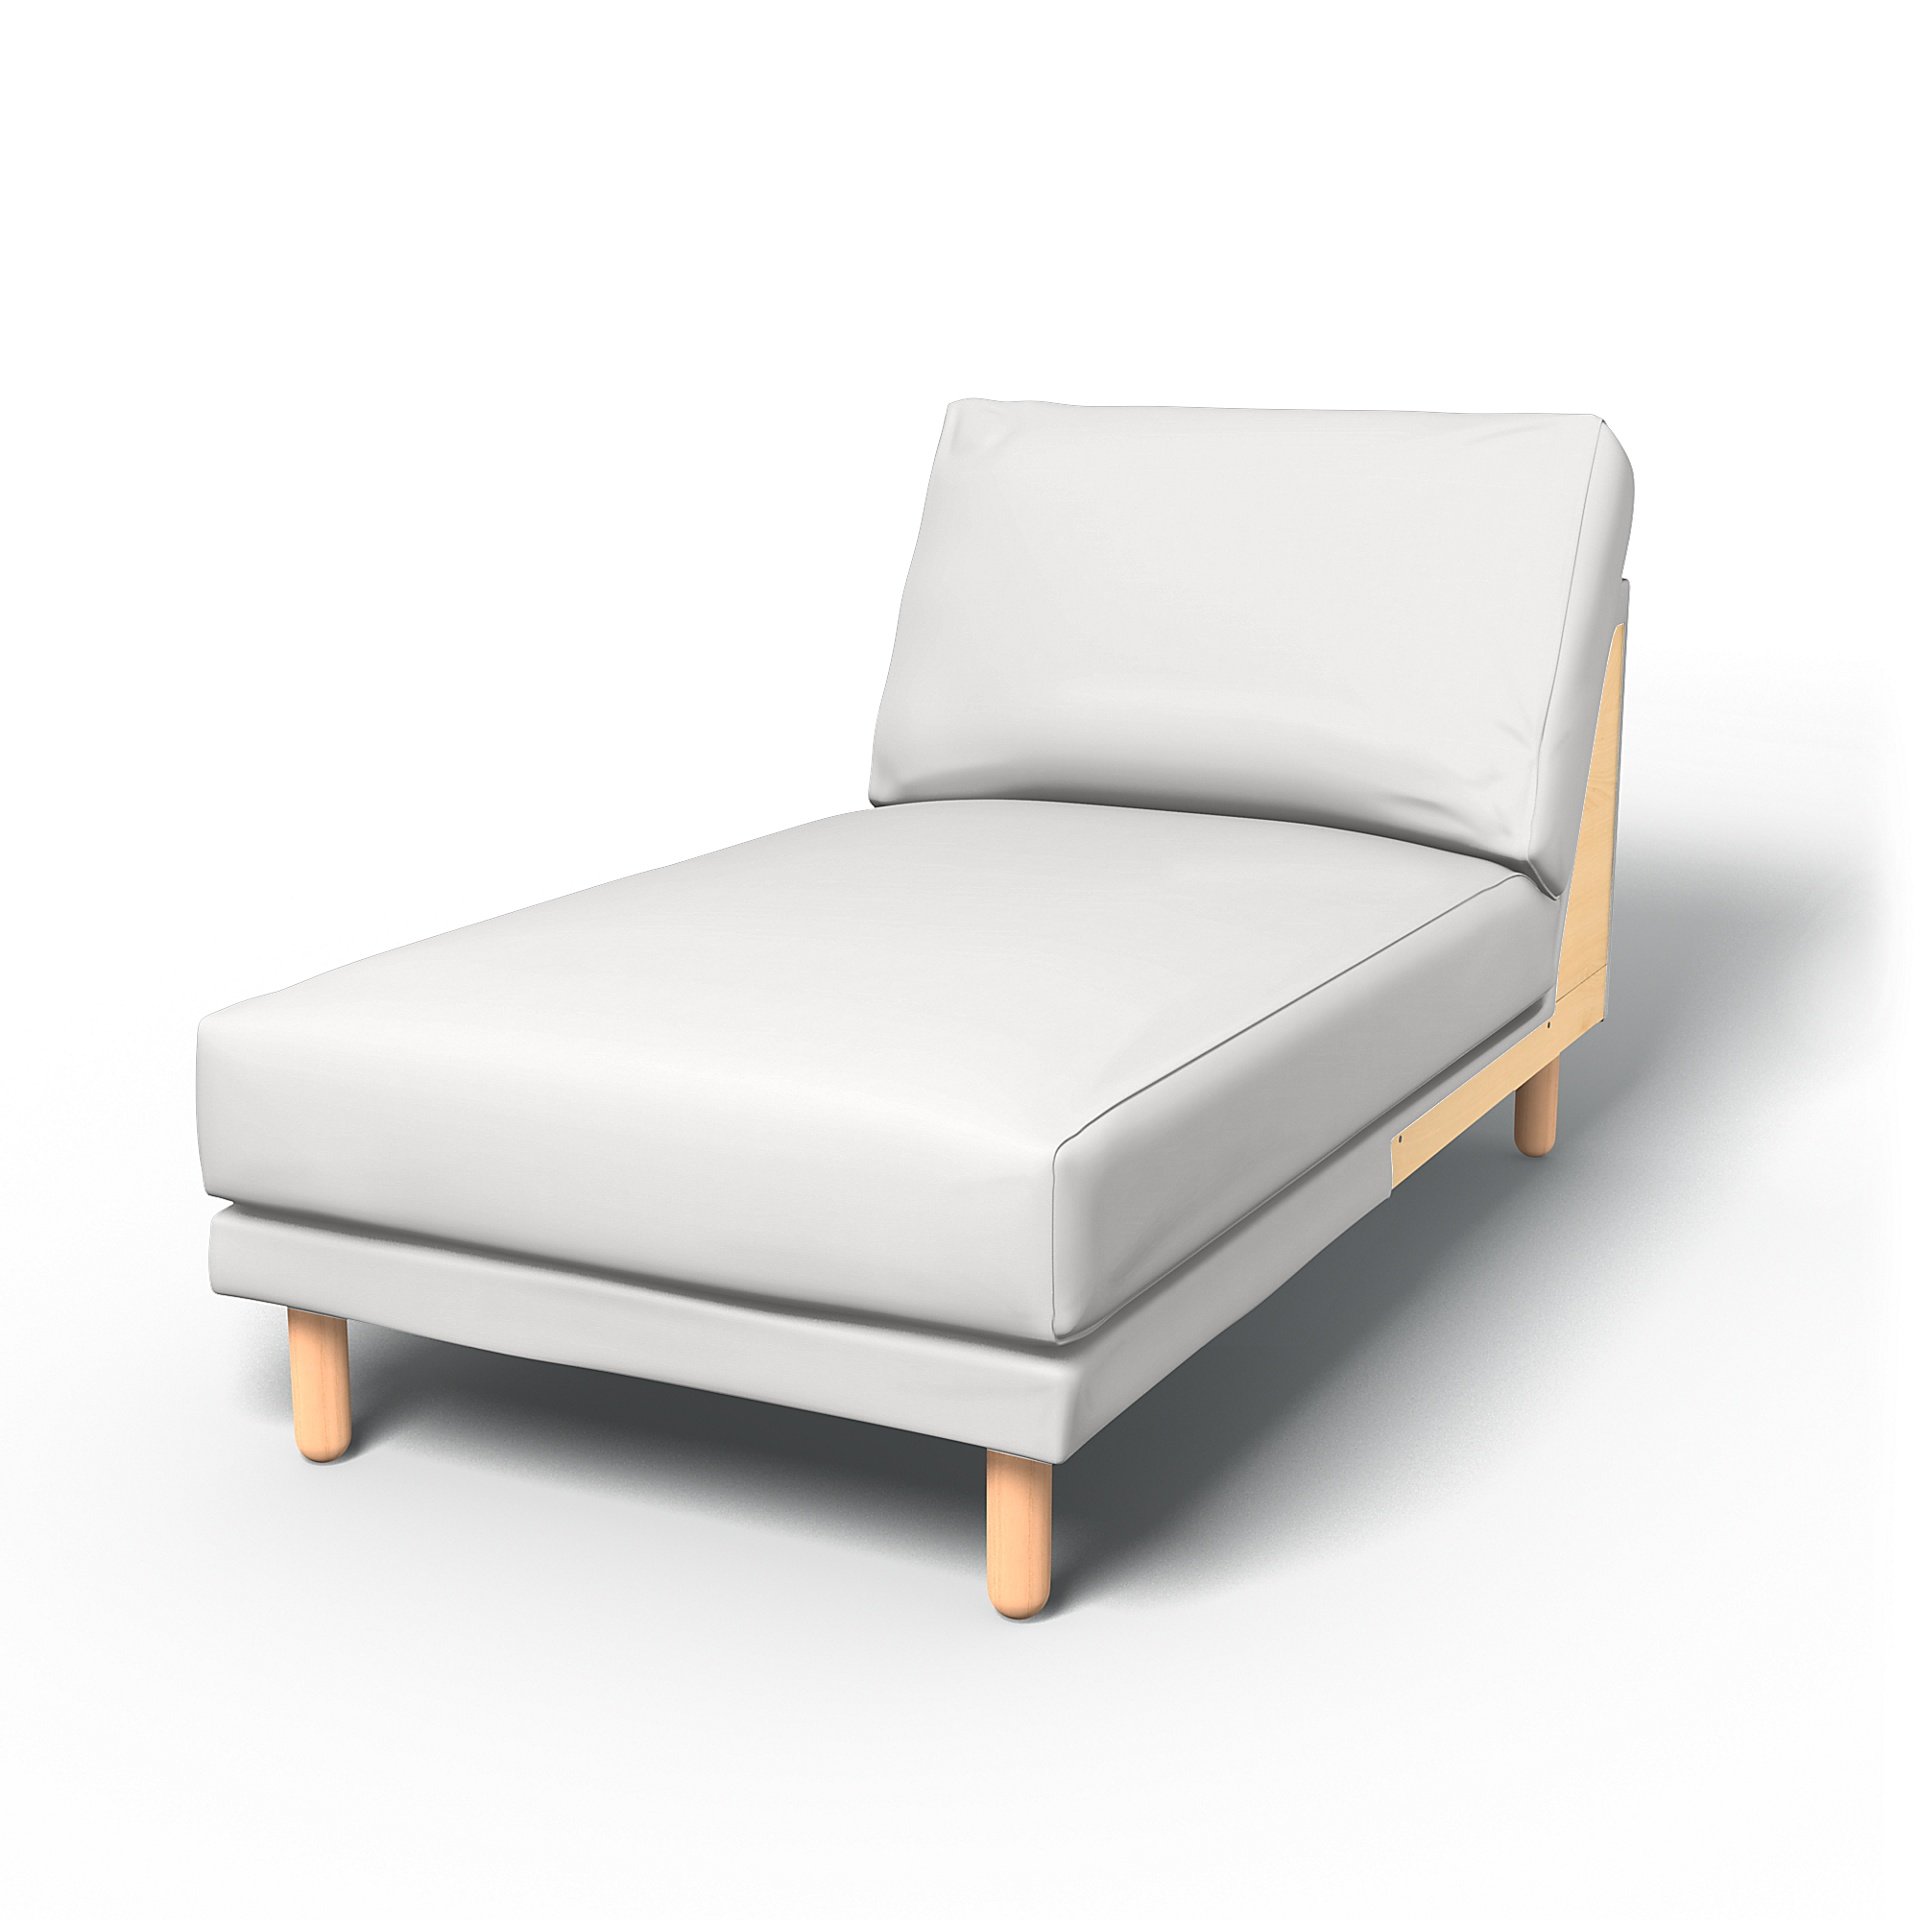 IKEA - Norsborg Chaise Longue Add-on Unit Cover, Absolute White, Cotton - Bemz